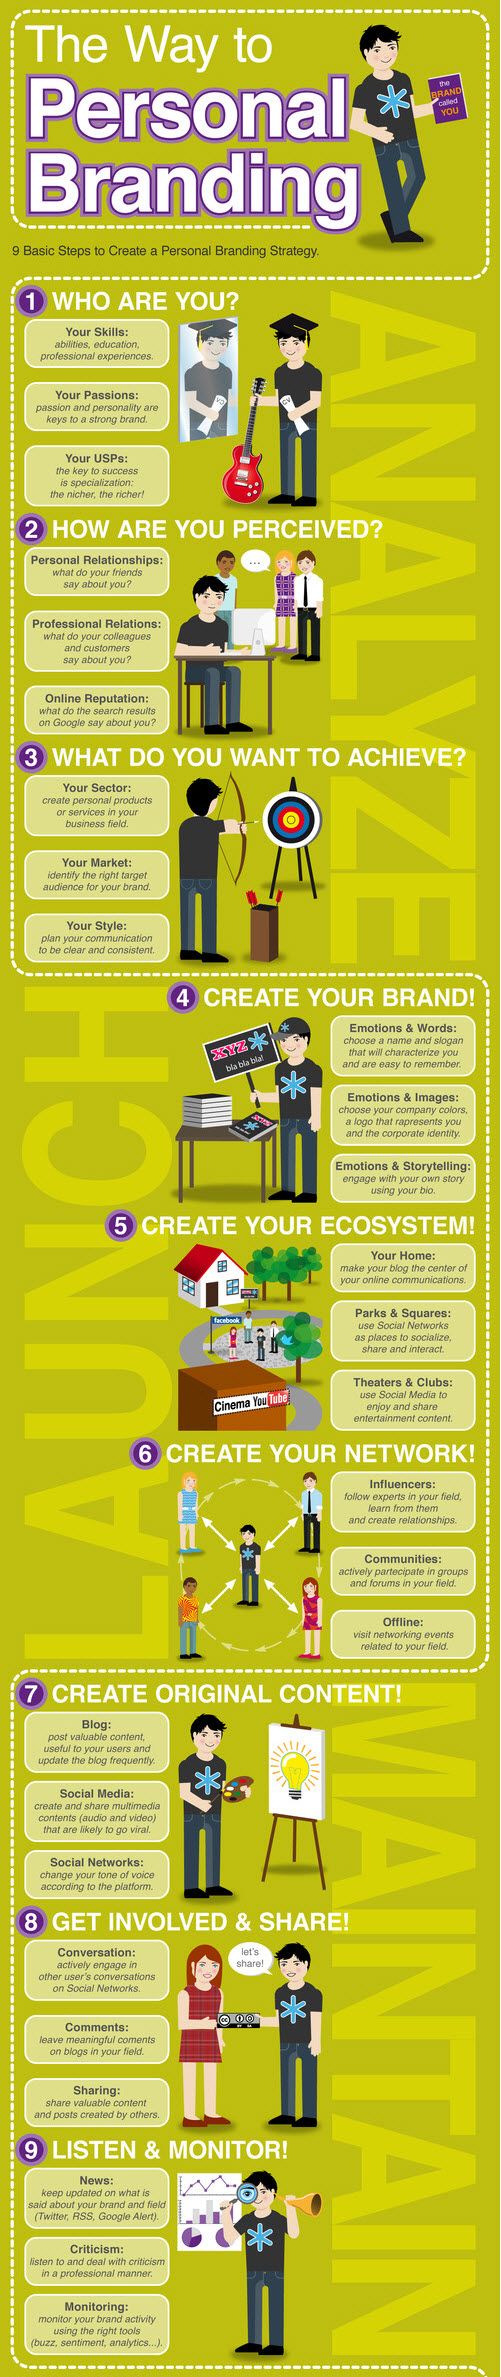 A Nine-Step Path to Personal Branding [Infographic]